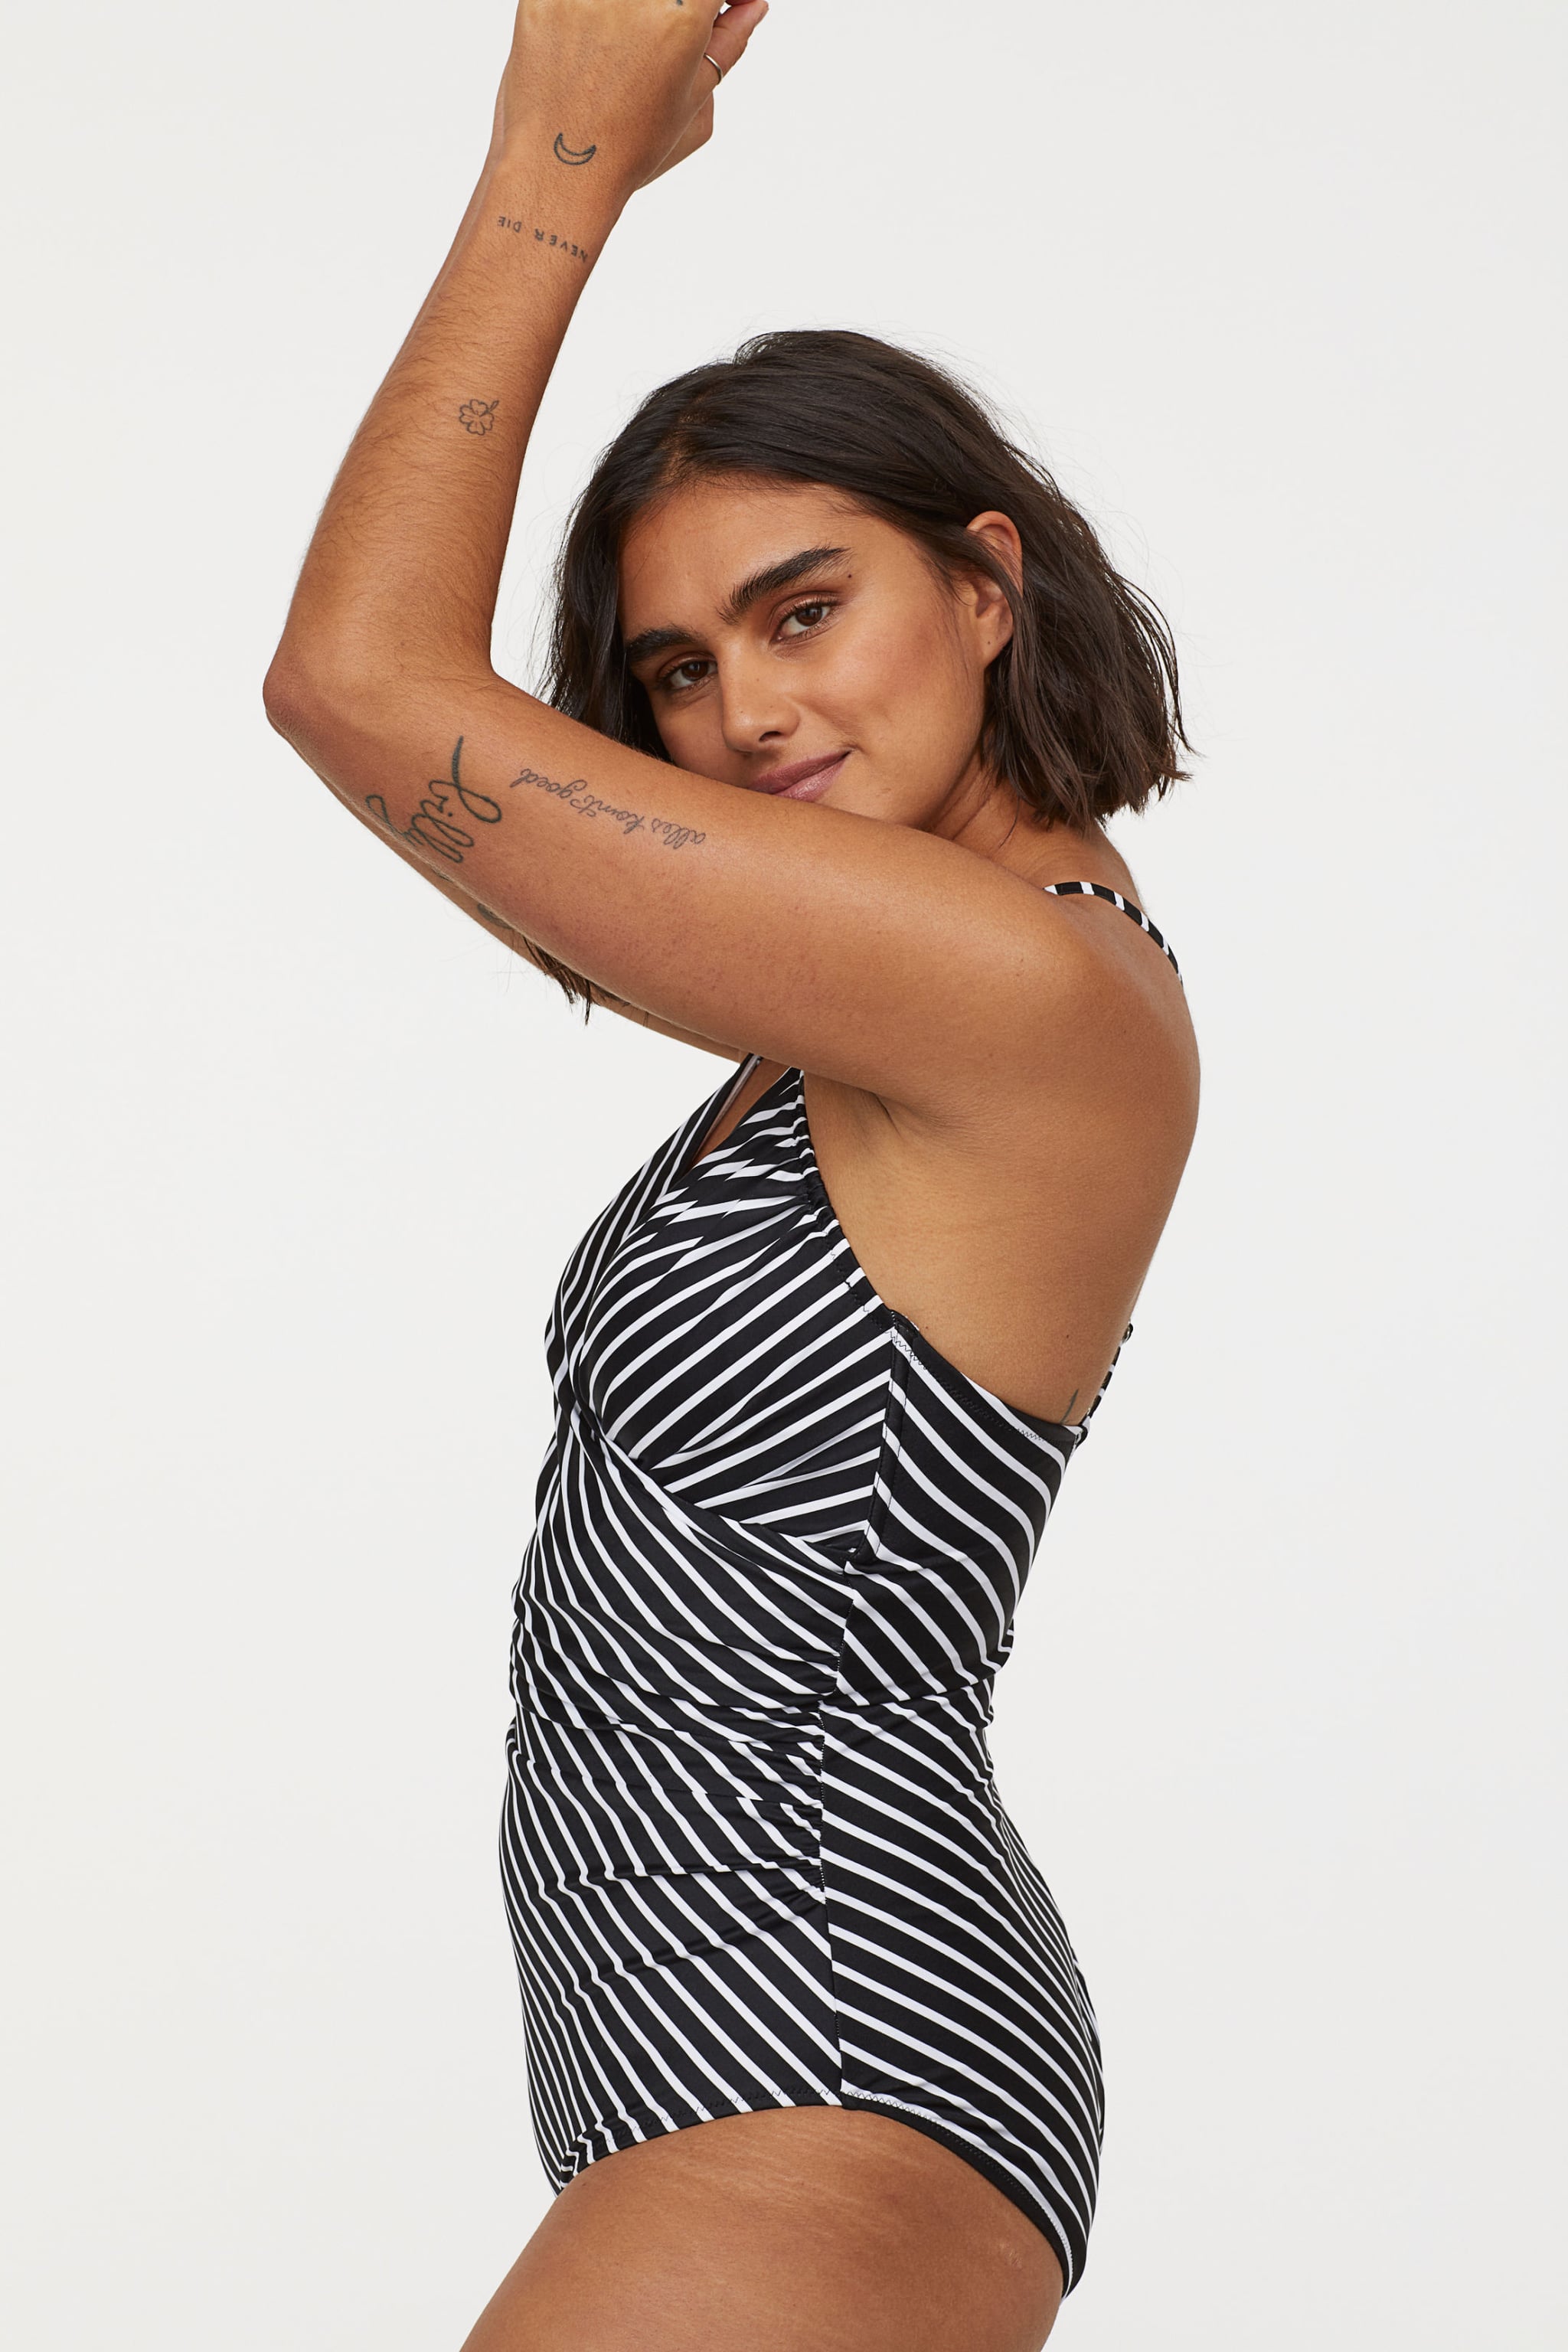 H&M Shaping Swimsuit